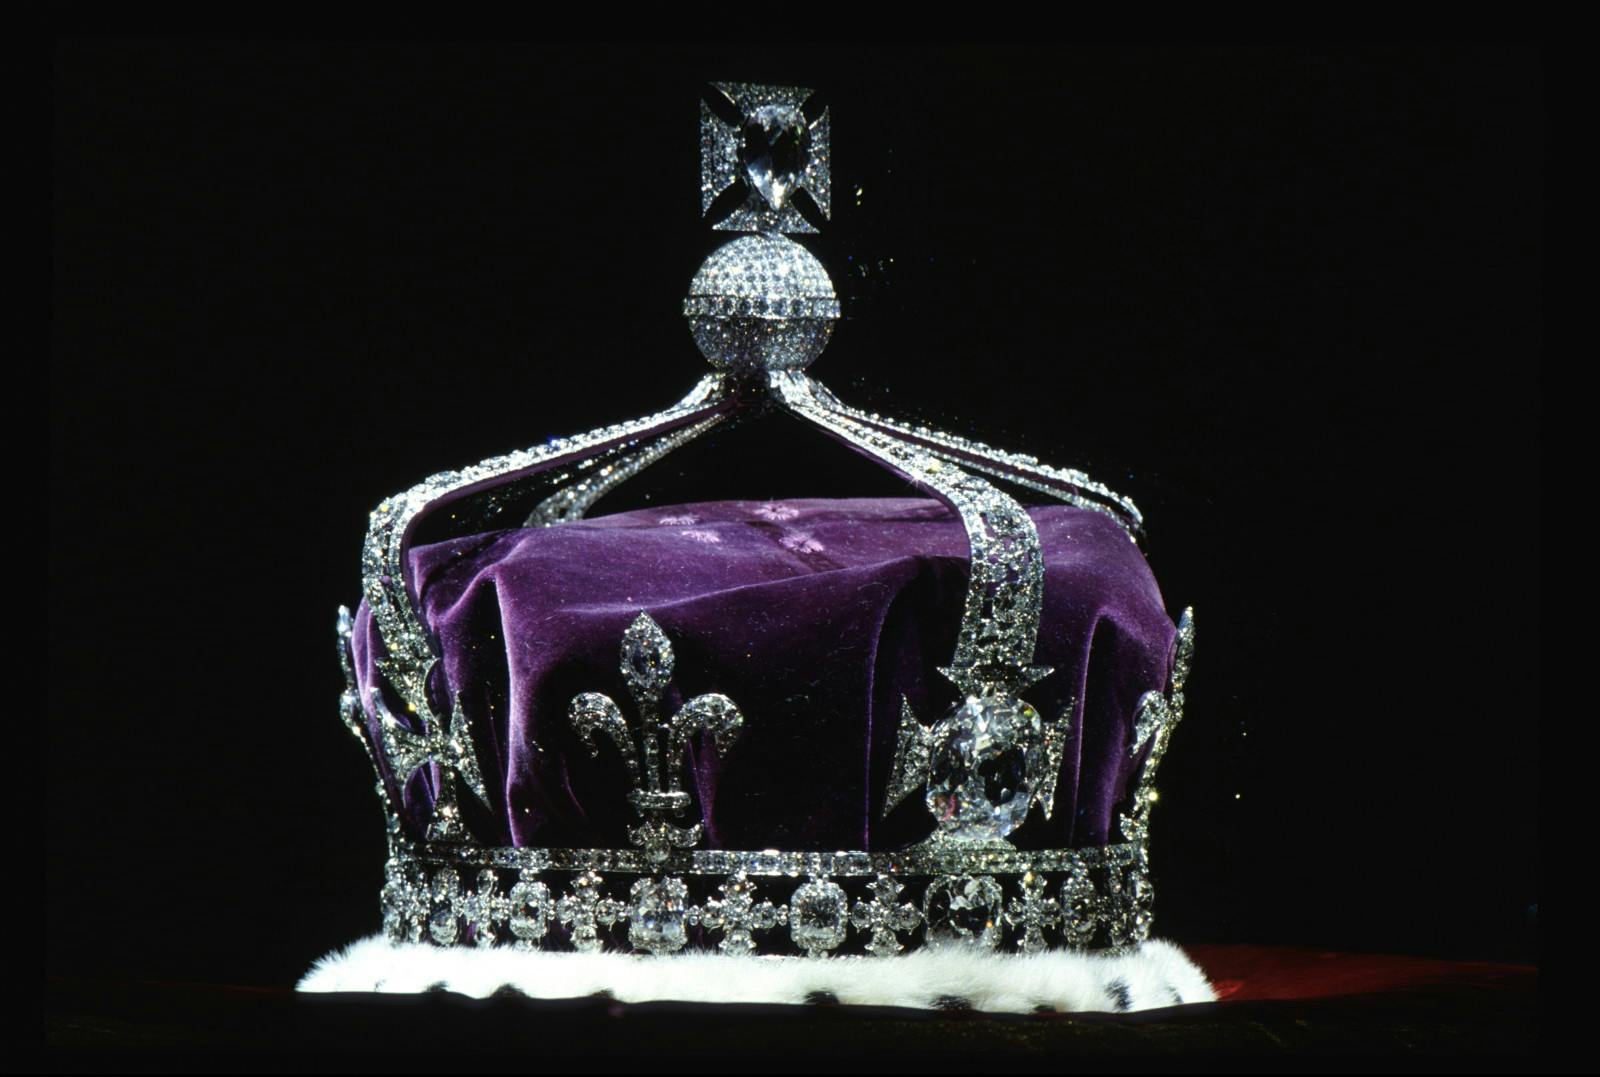 What the Koh-i-noor Really Represents